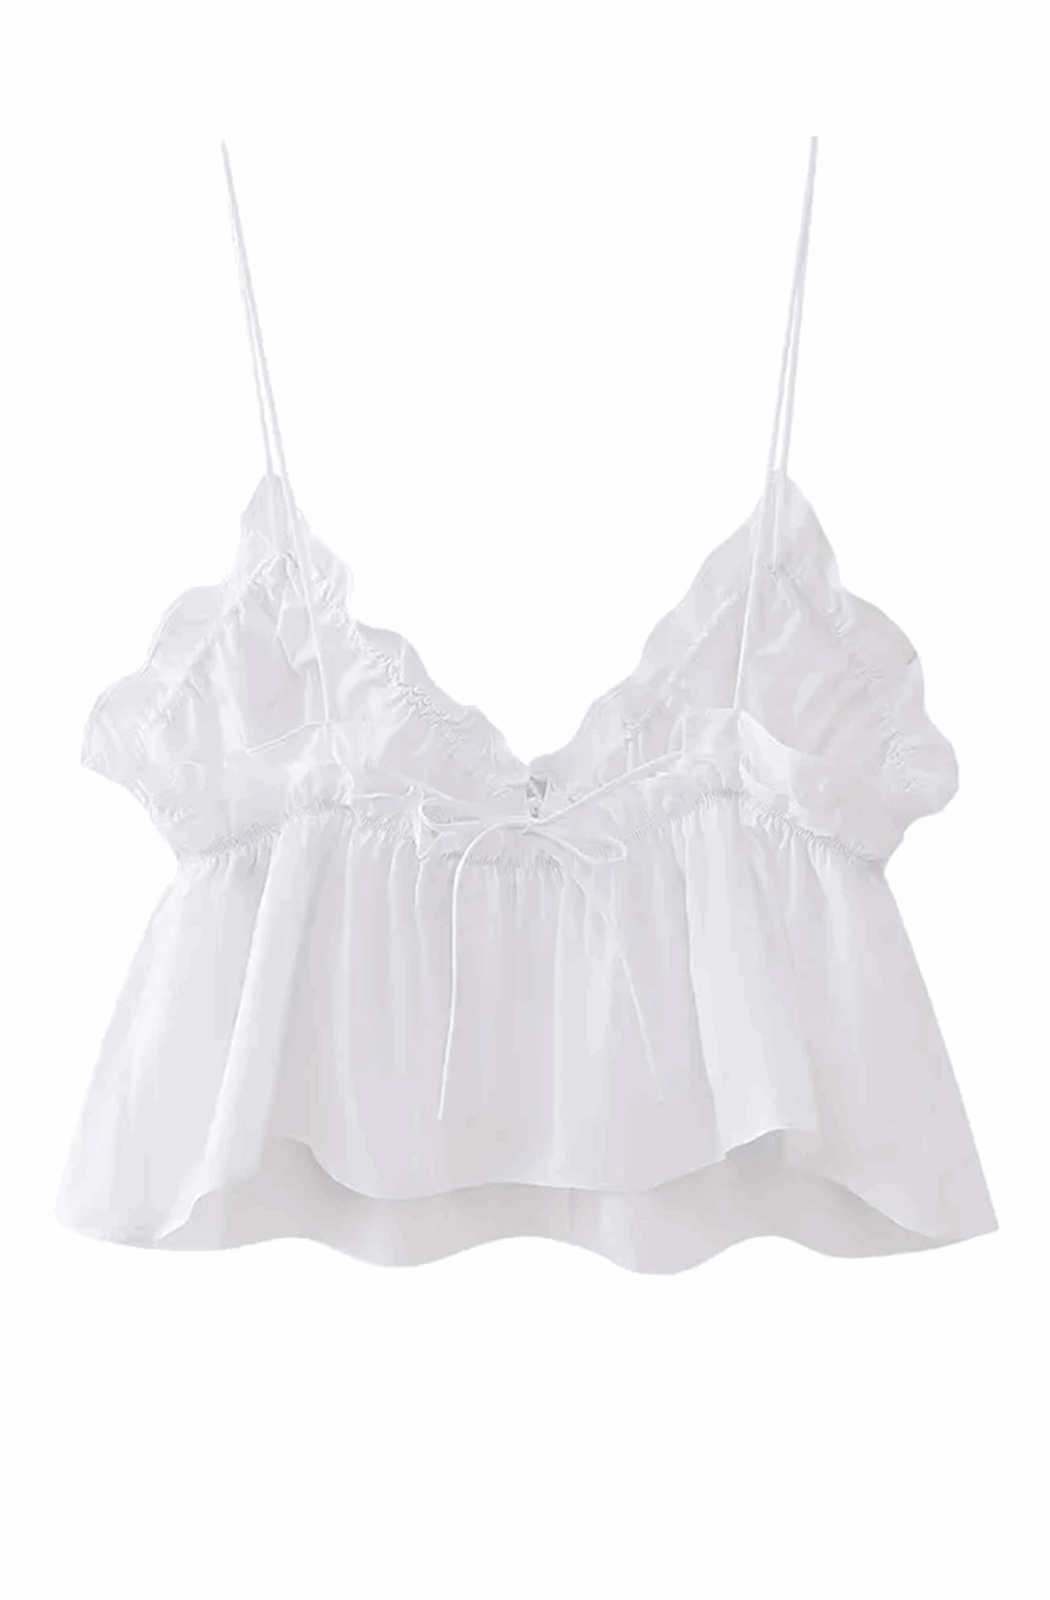 Ruffle crop top with thin straps